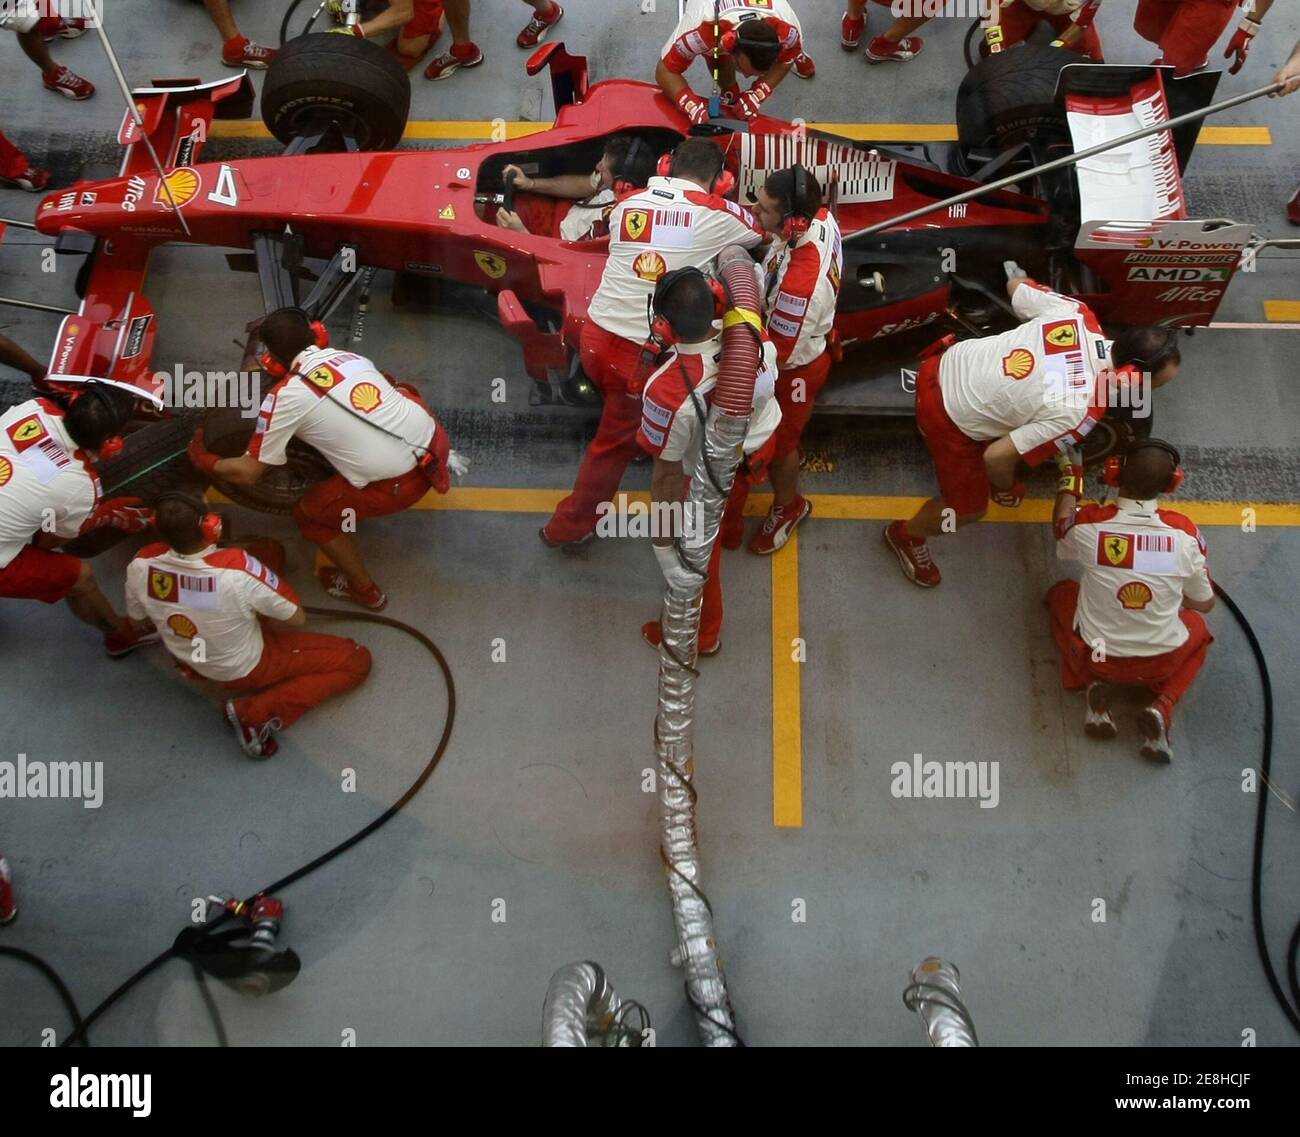 Crew members of the Ferrari Formula One team practise refuelling and pit stops prior to the start of the third practice session of the Singapore F1 Grand Prix at the Marina Bay street circuit September 26, 2009. This image was shot through glass. REUTERS/Tim Chong   (SINGAPORE SPORT MOTOR RACING) Stock Photo